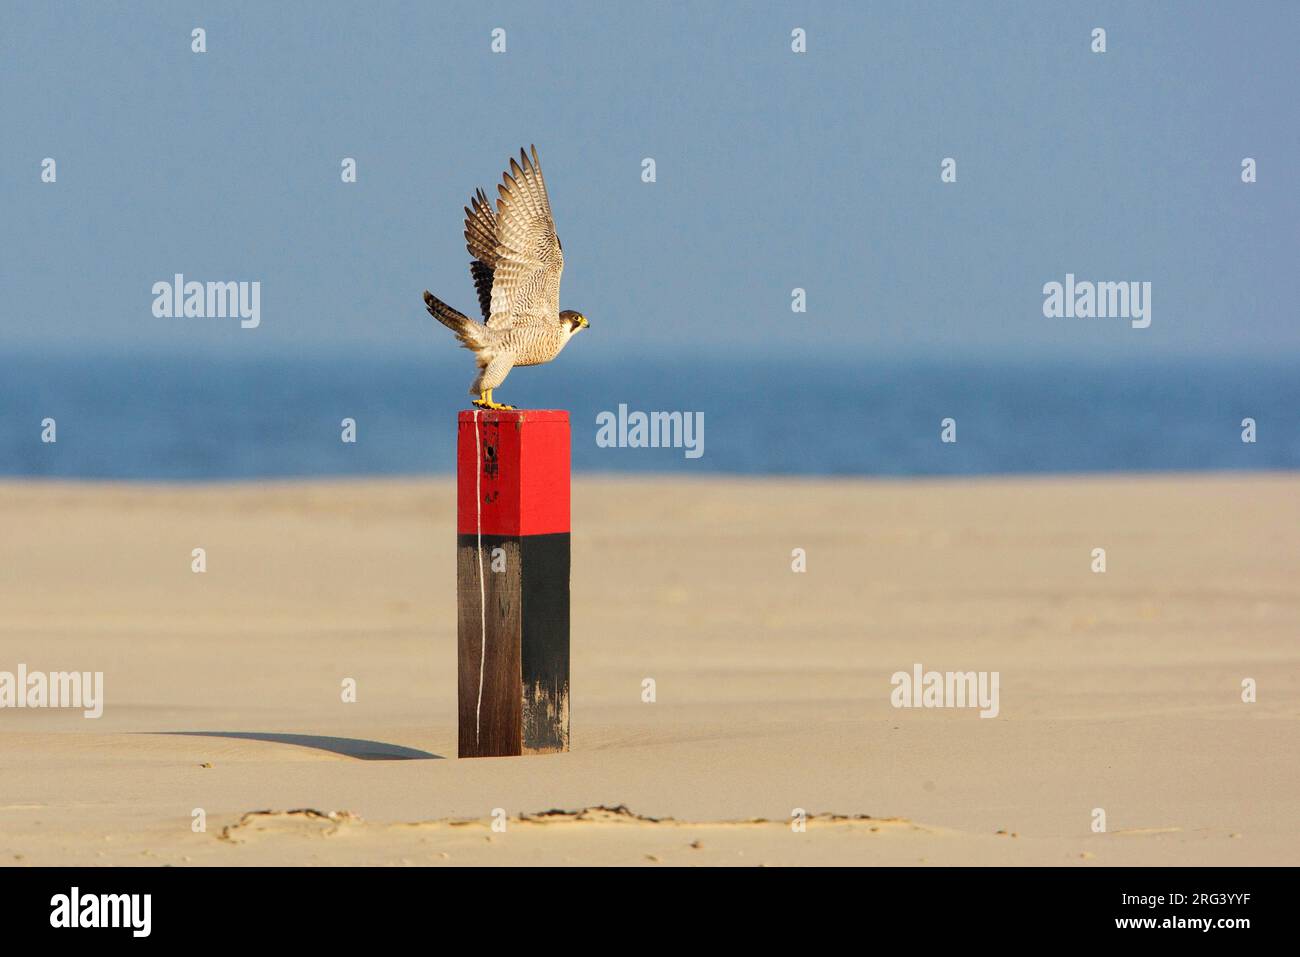 Peregrine Falcon (Falco peregrinus) taking off from a wooden pole on the beach of a Wadden Island in the Netherlands. Stock Photo